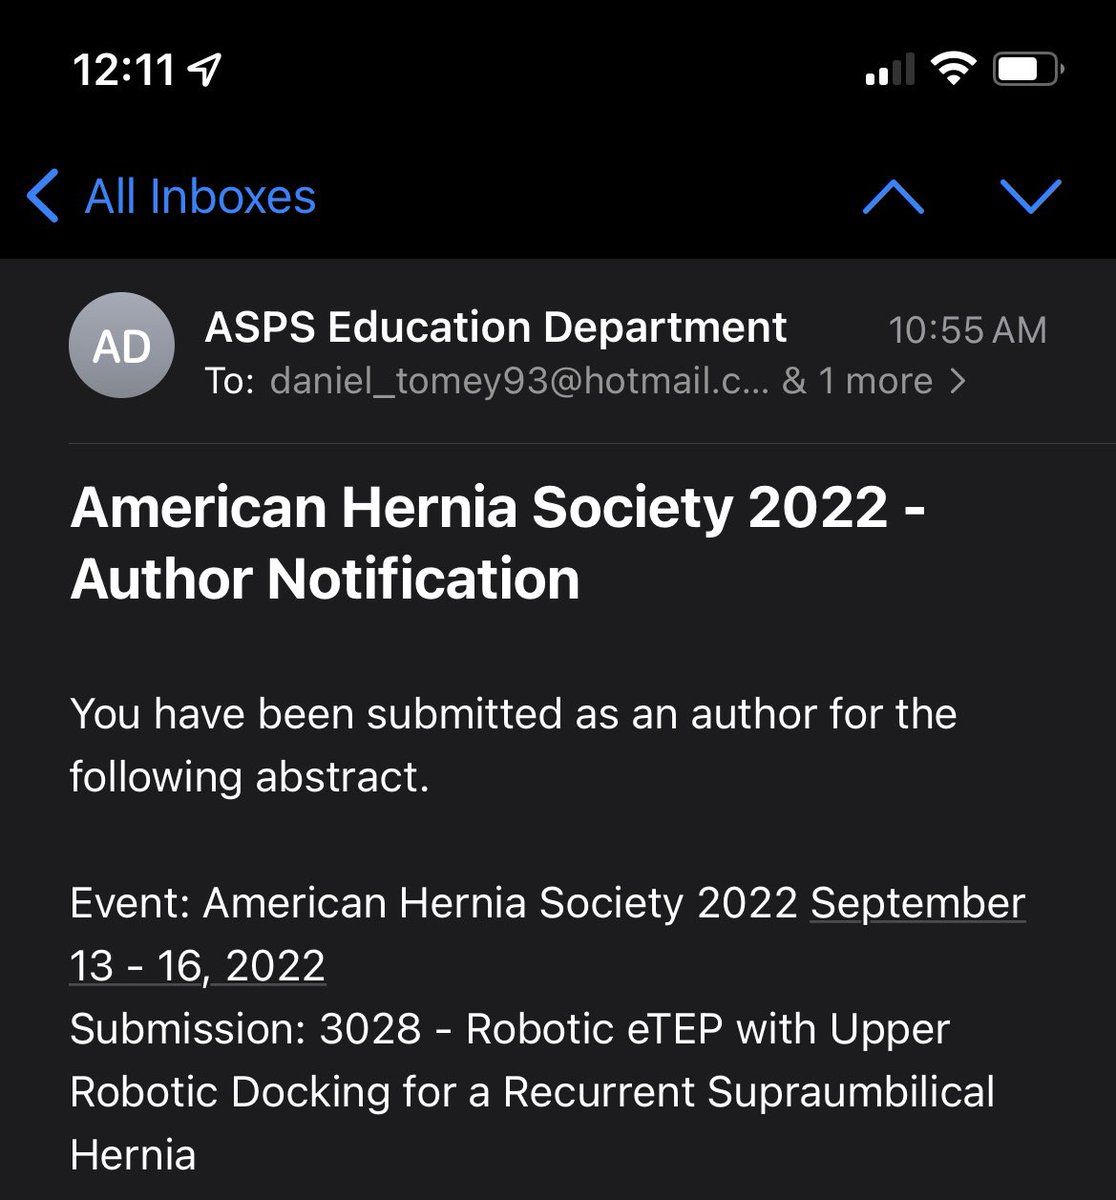 Right on time🙌🏽💪🏽 @AmericanHernia 

#AHS22 #herniasurgery #hernia #abstractsubmissions #hernia #charlottenc